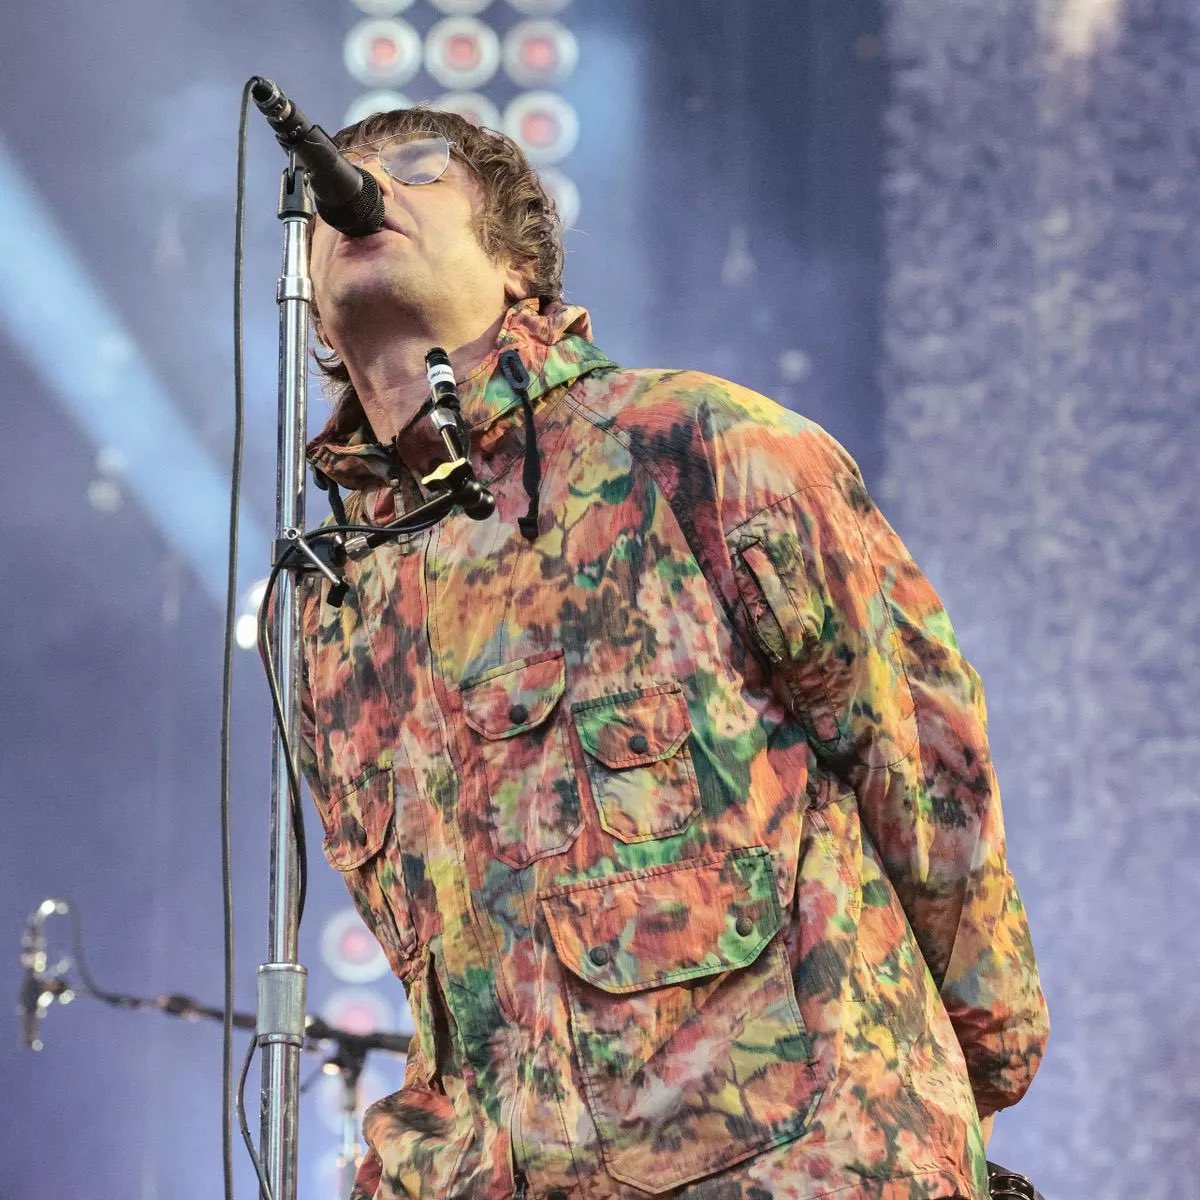 One year ago today, Liam Gallagher played at Etihad Stadium in Manchester